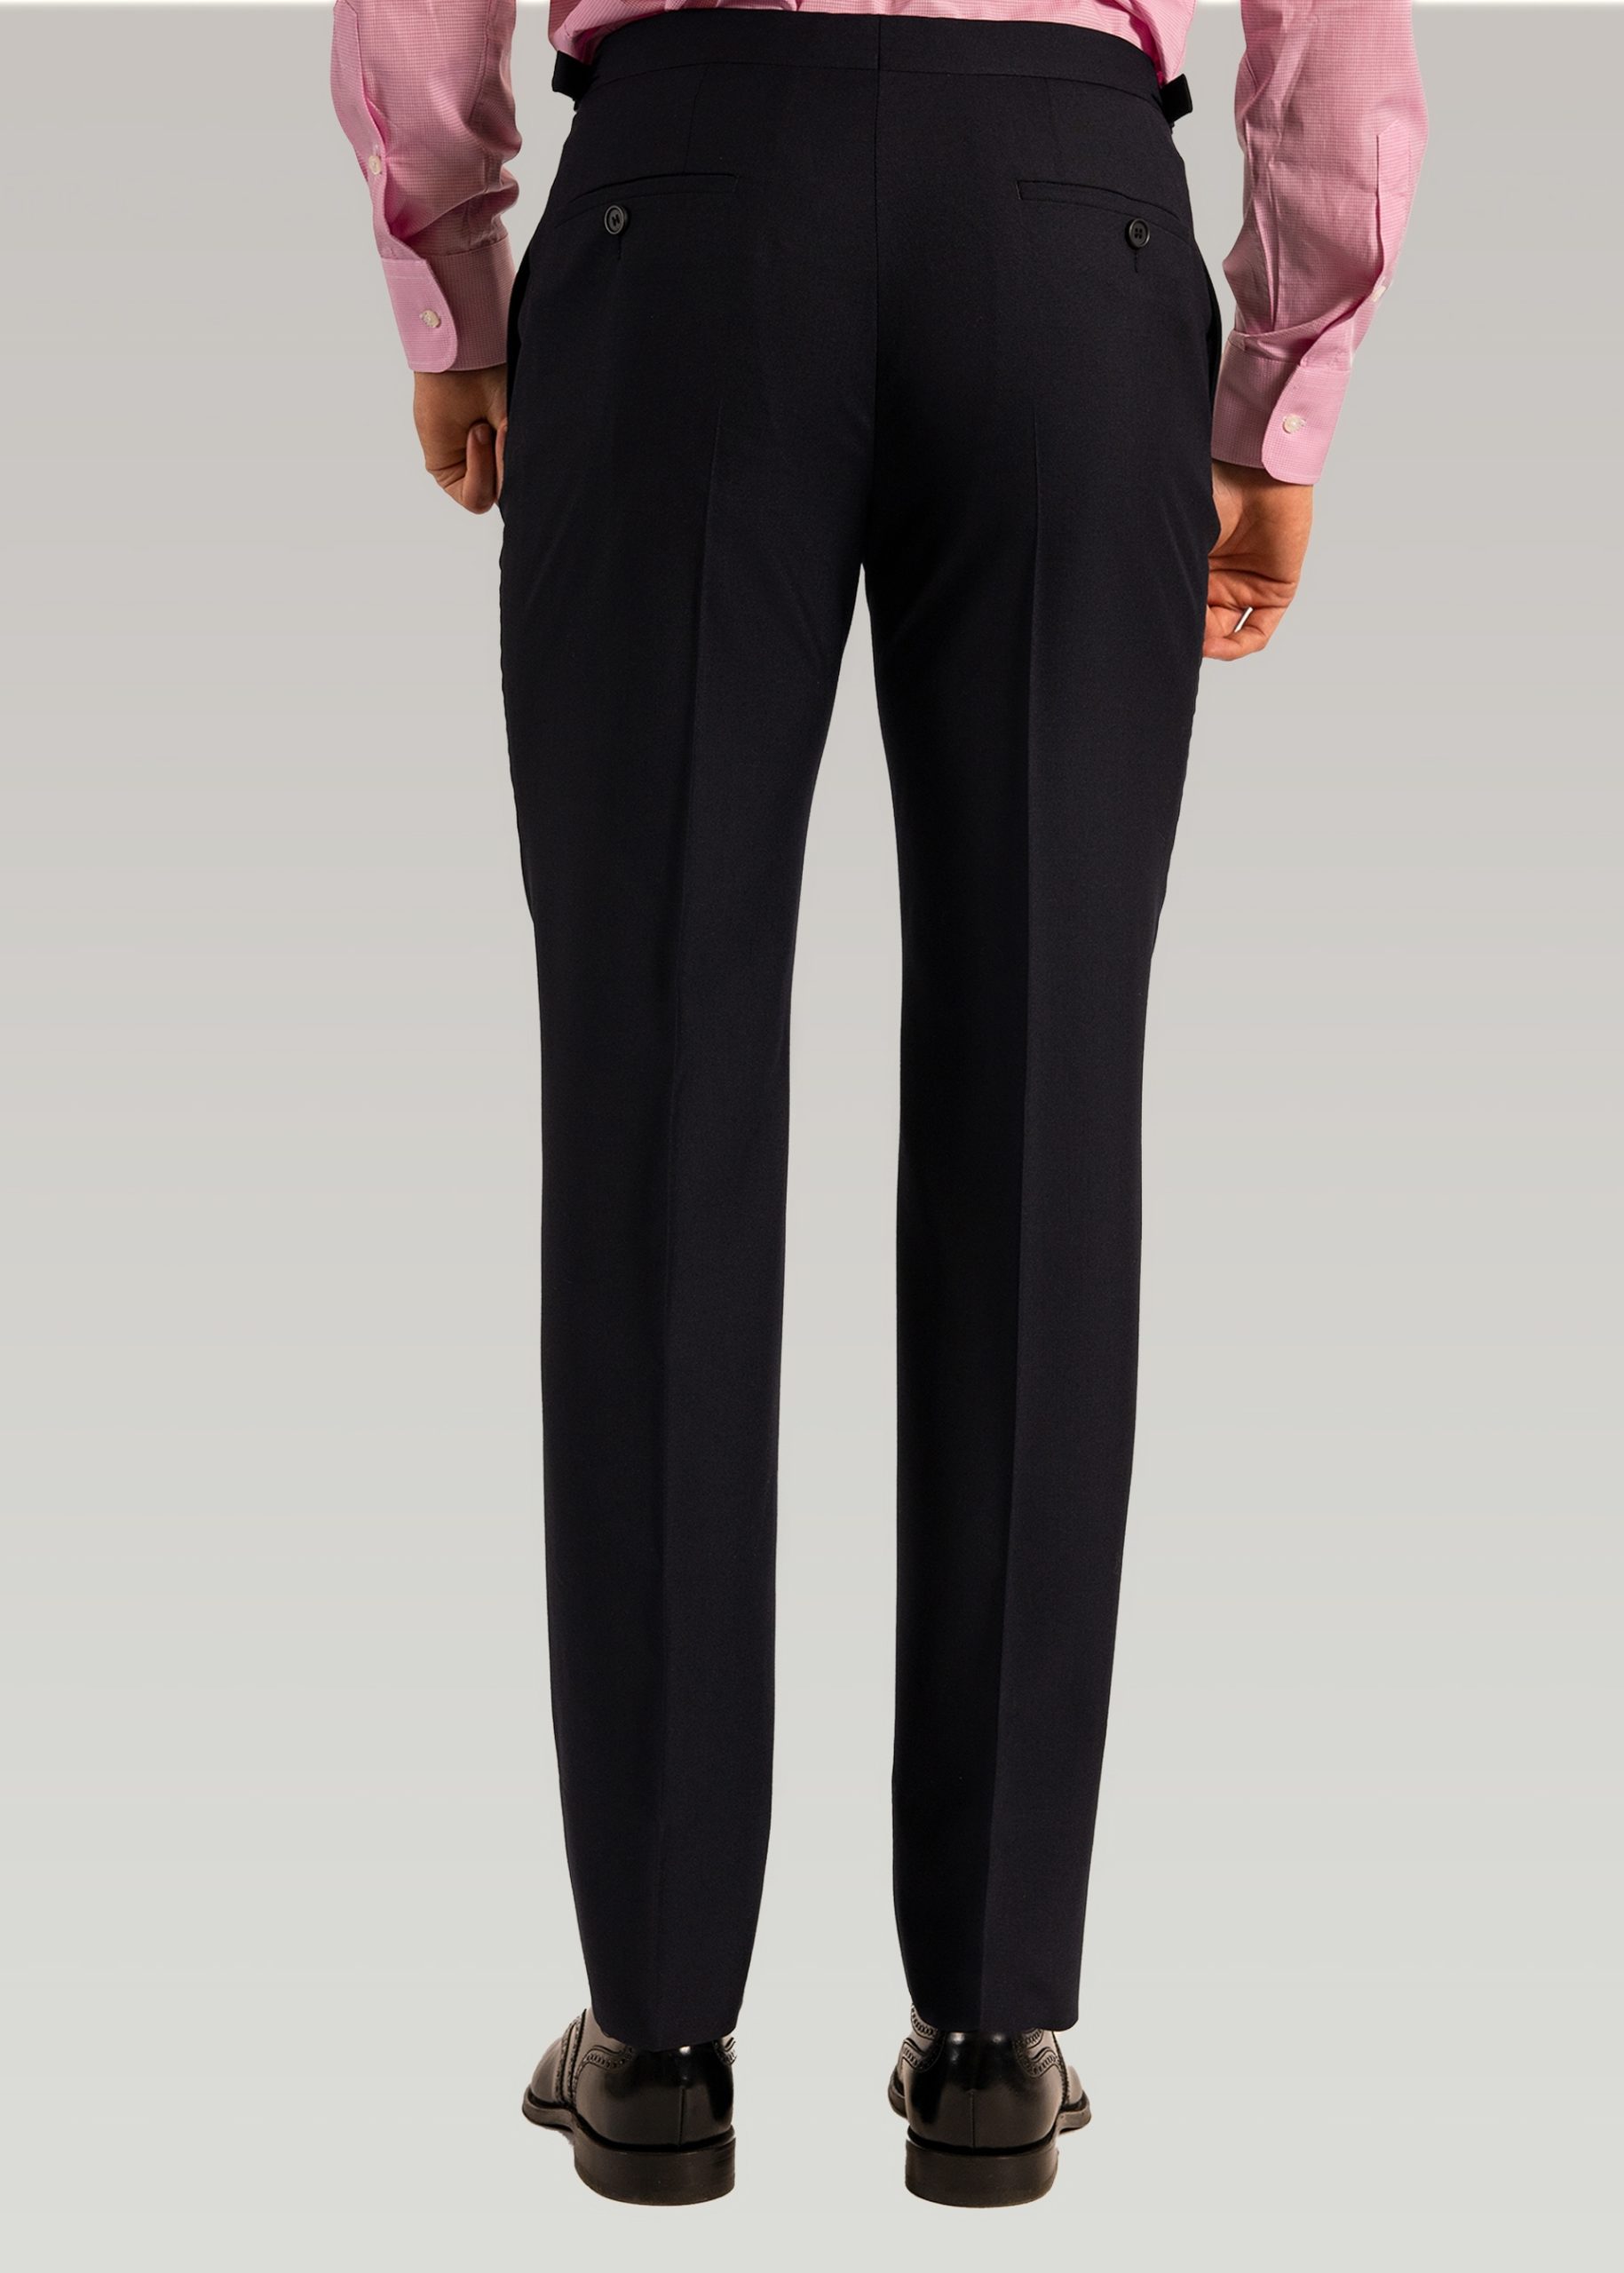 Plain navy mens suit trousers by Roderick Charles